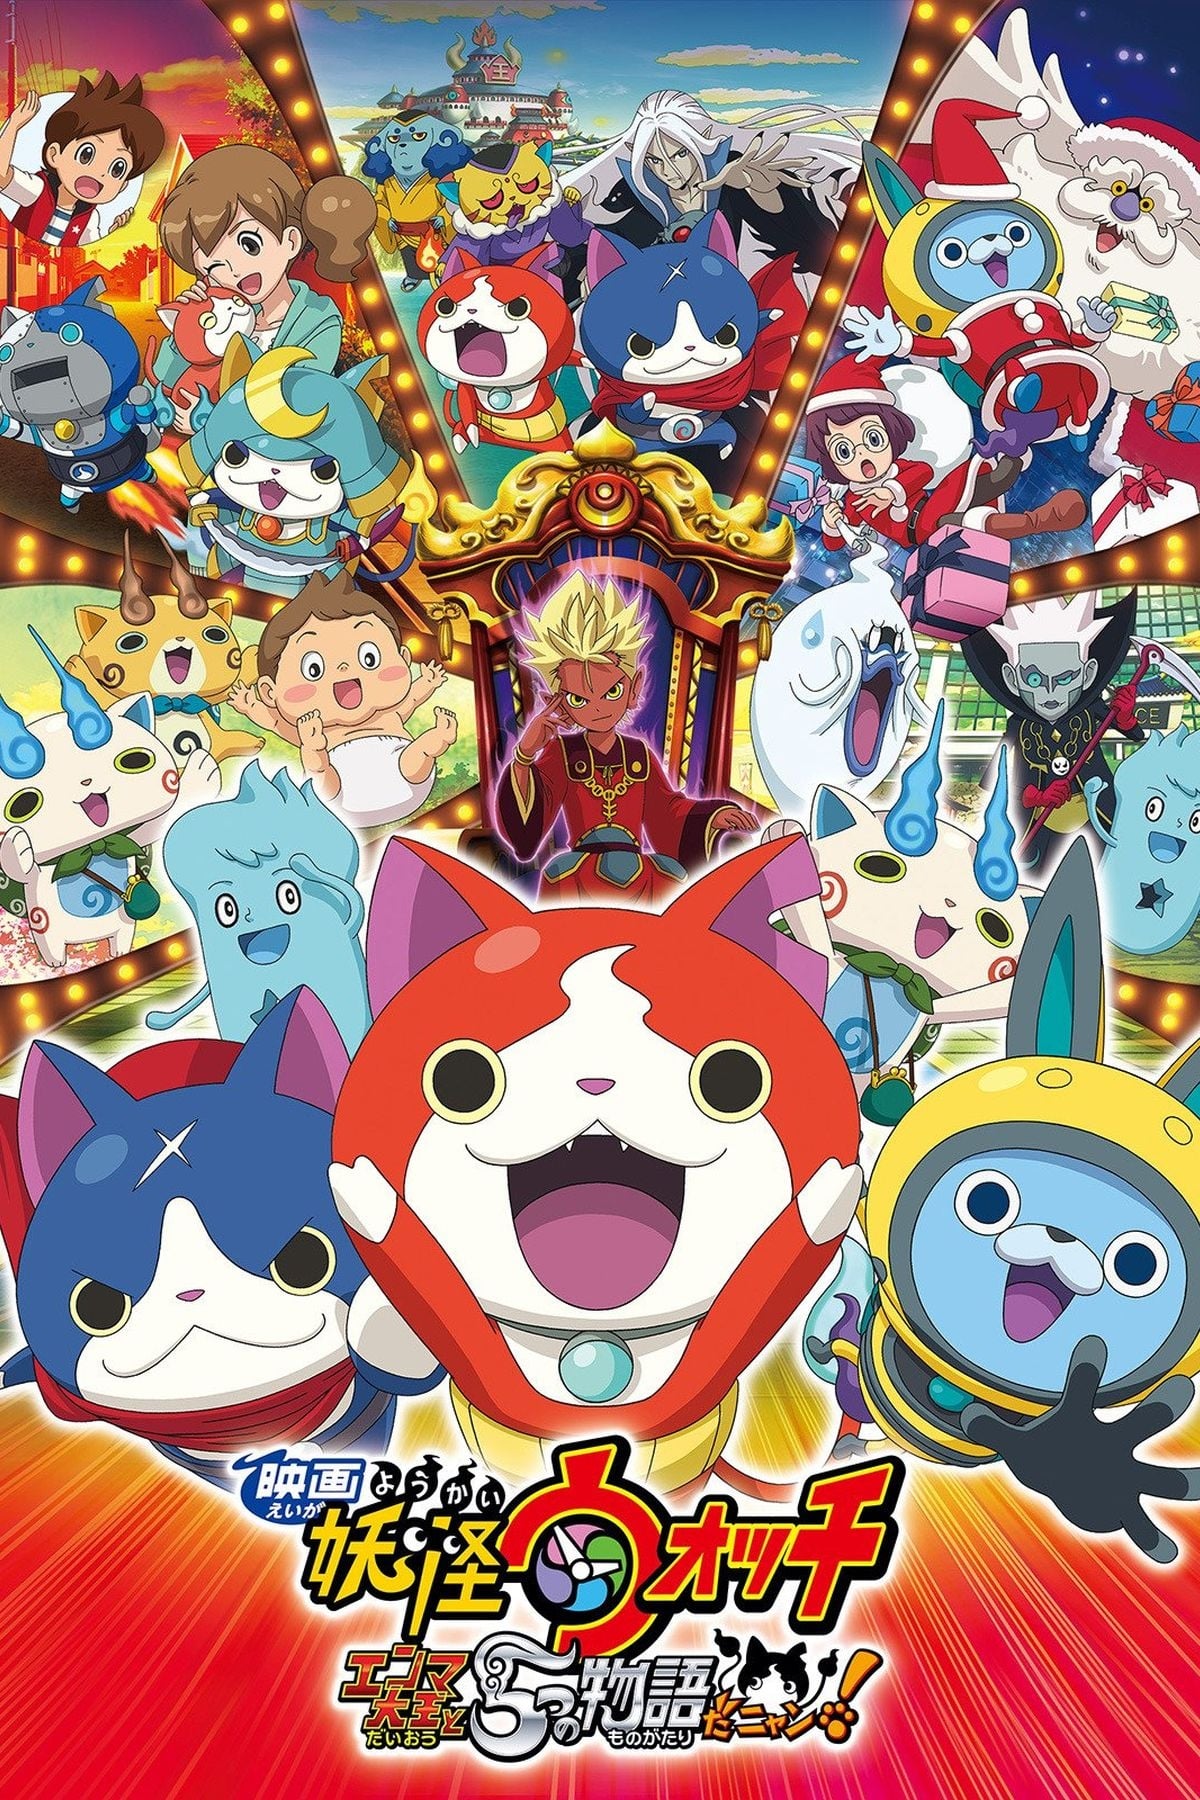 Yo-kai Watch The Movie: The Great King Enma and the Five Tales, Meow!